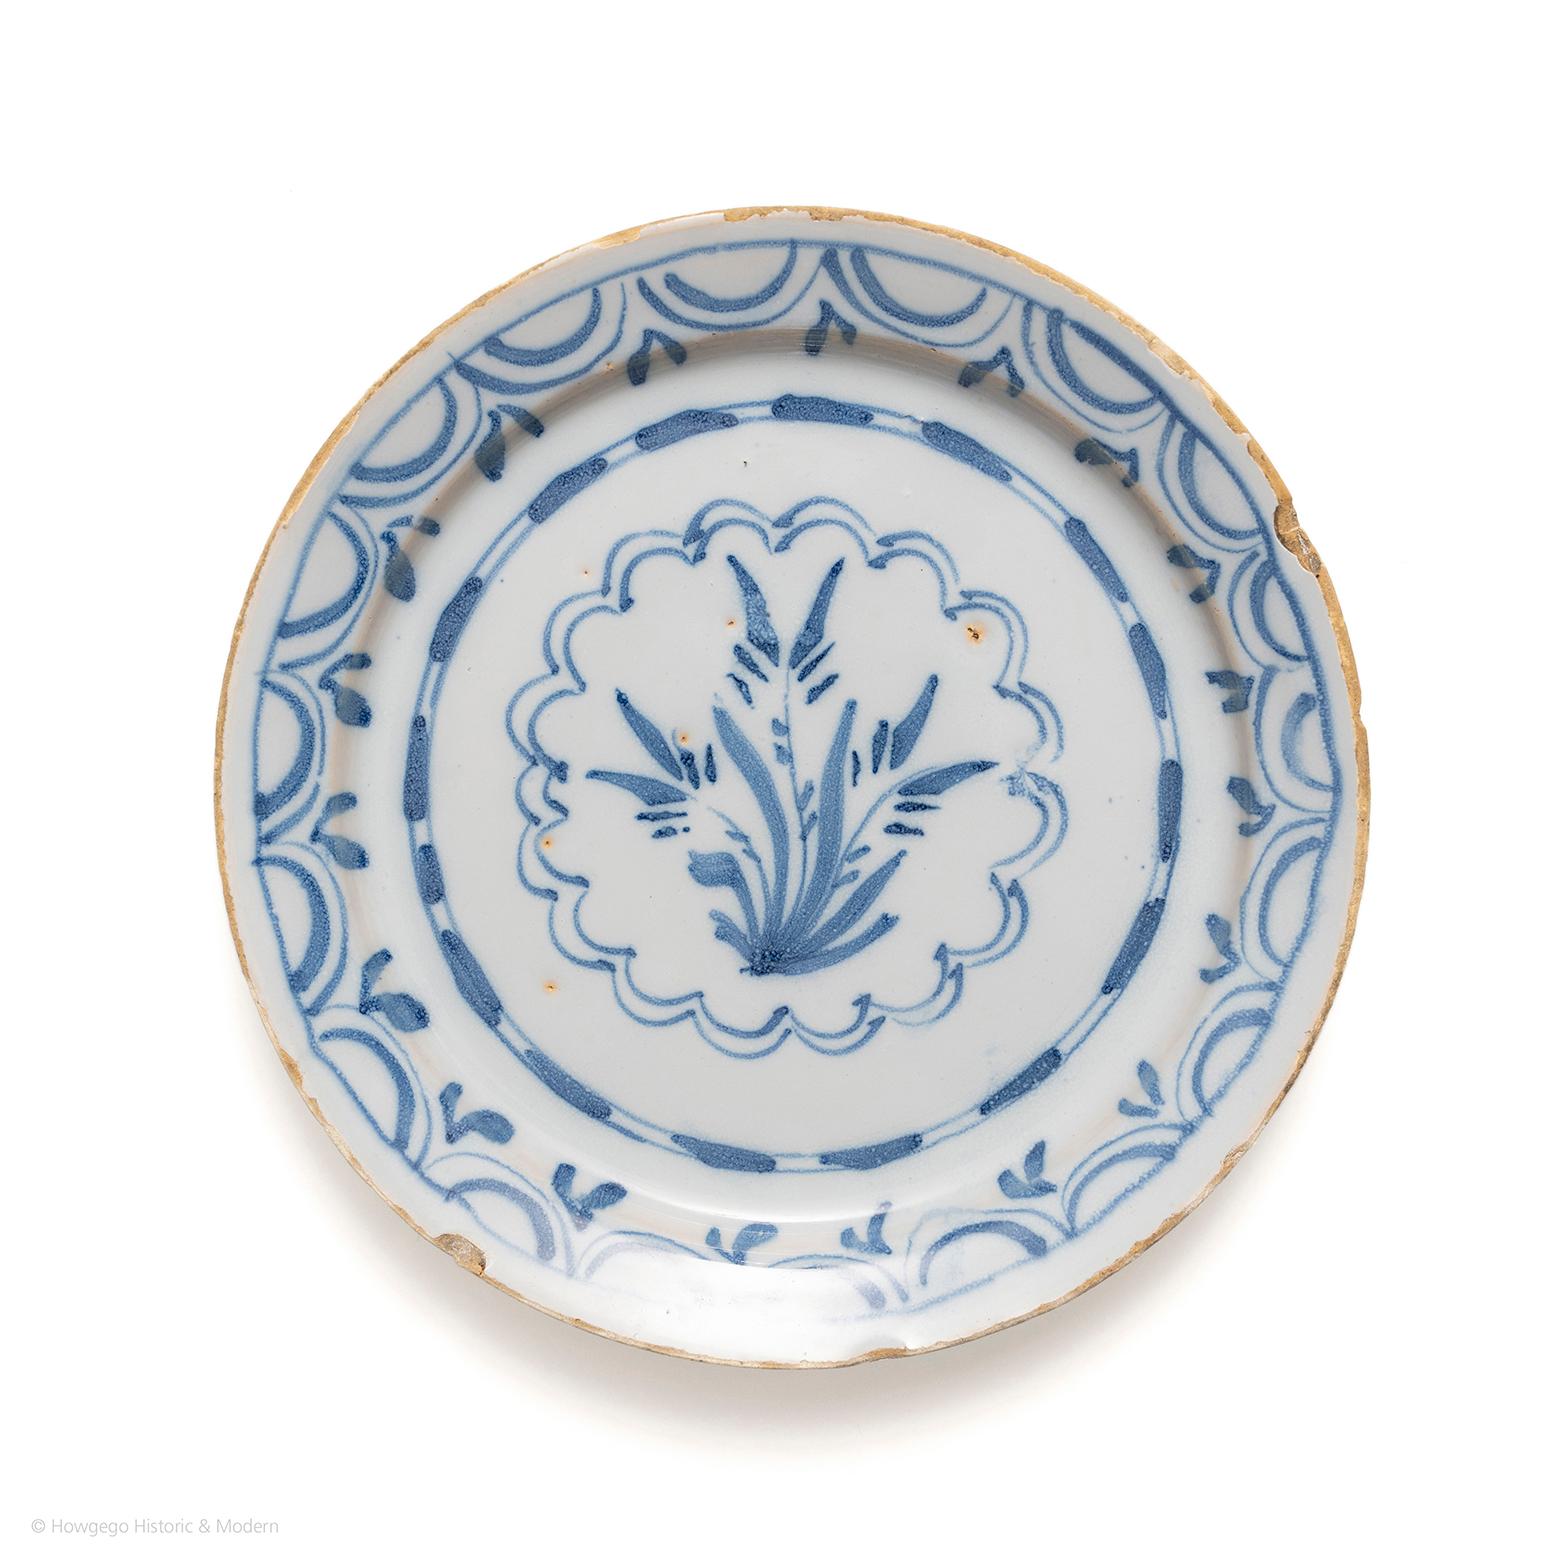 Decorated with a stylised fern surrounded by a double-circle petal shaped border and an arc border around the rim. Decorated in blue on blue glaze. In original condition. Probably London, circa 1720.
diameter 19.5cm., 7 3/4